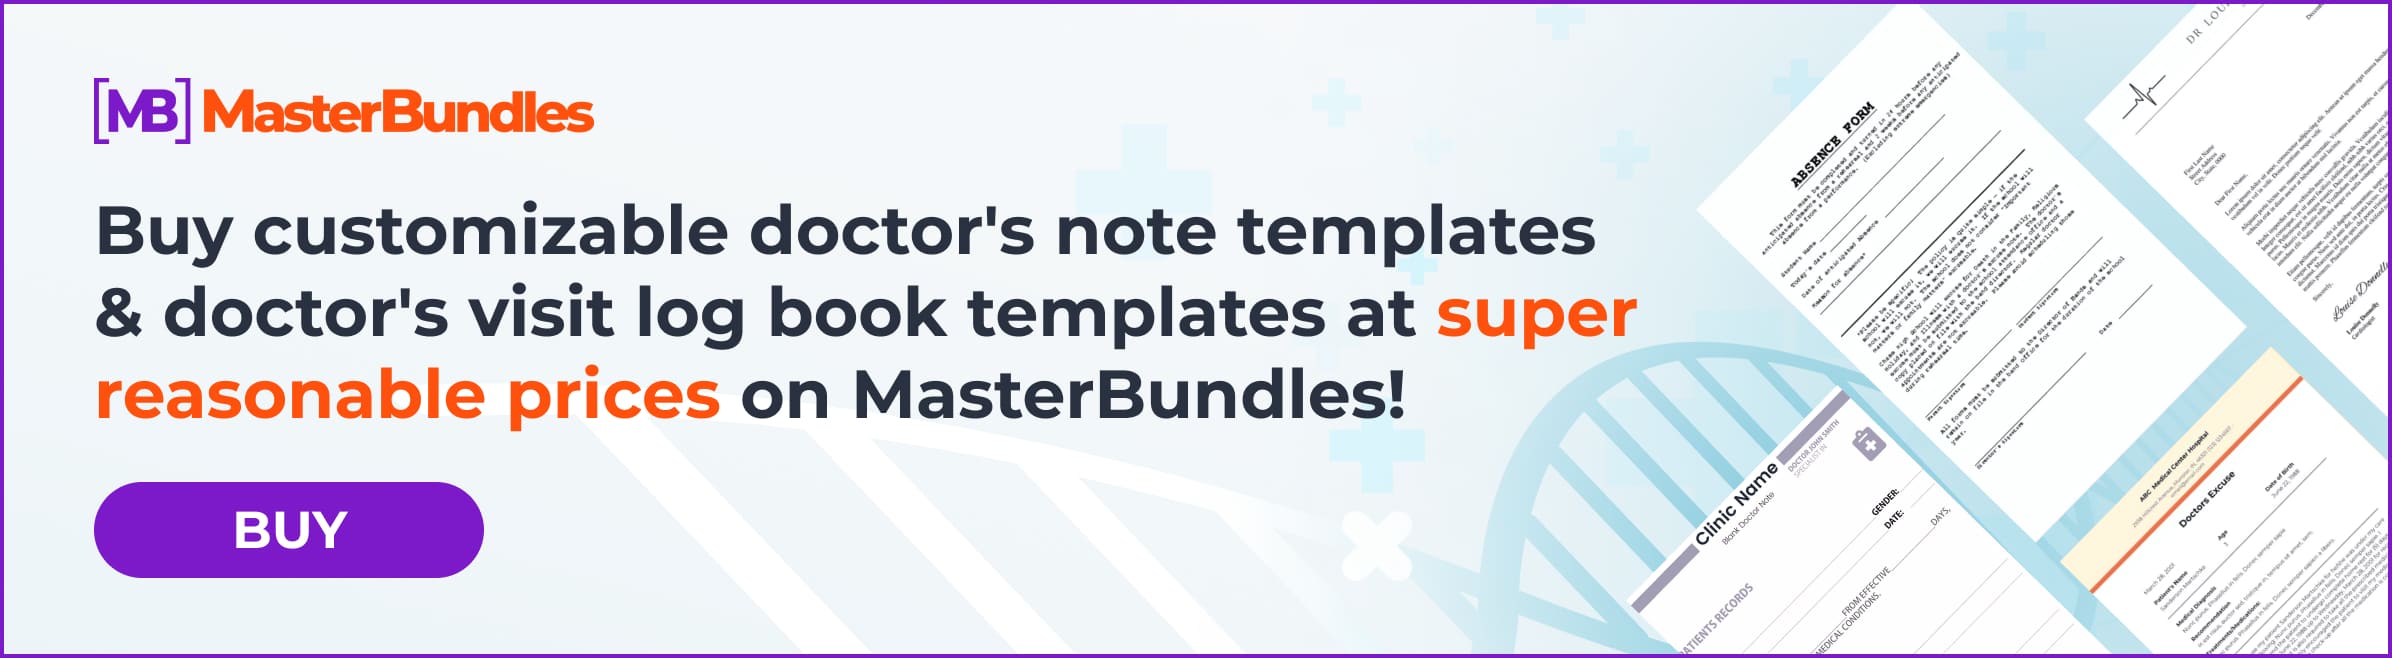 Banner for doctor's note templates with discount.